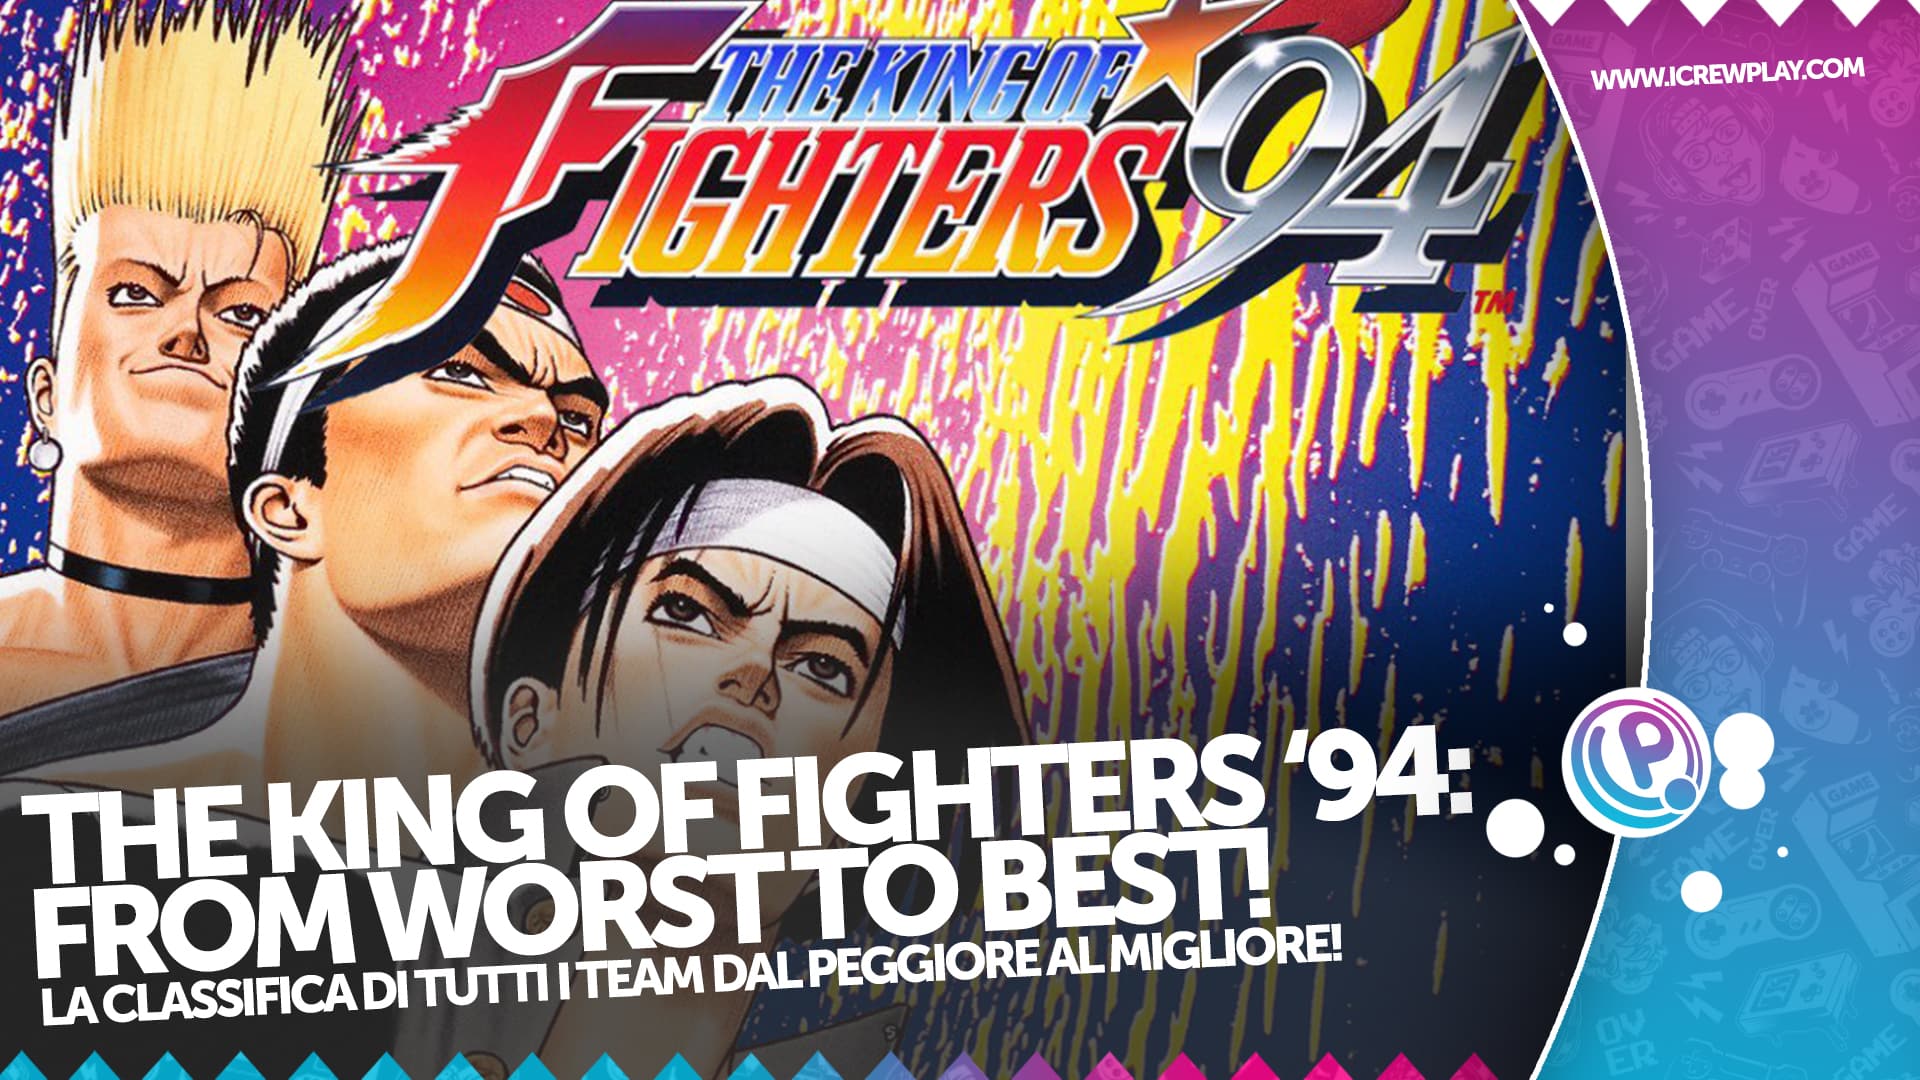 The King of Fighters 94 cover mod